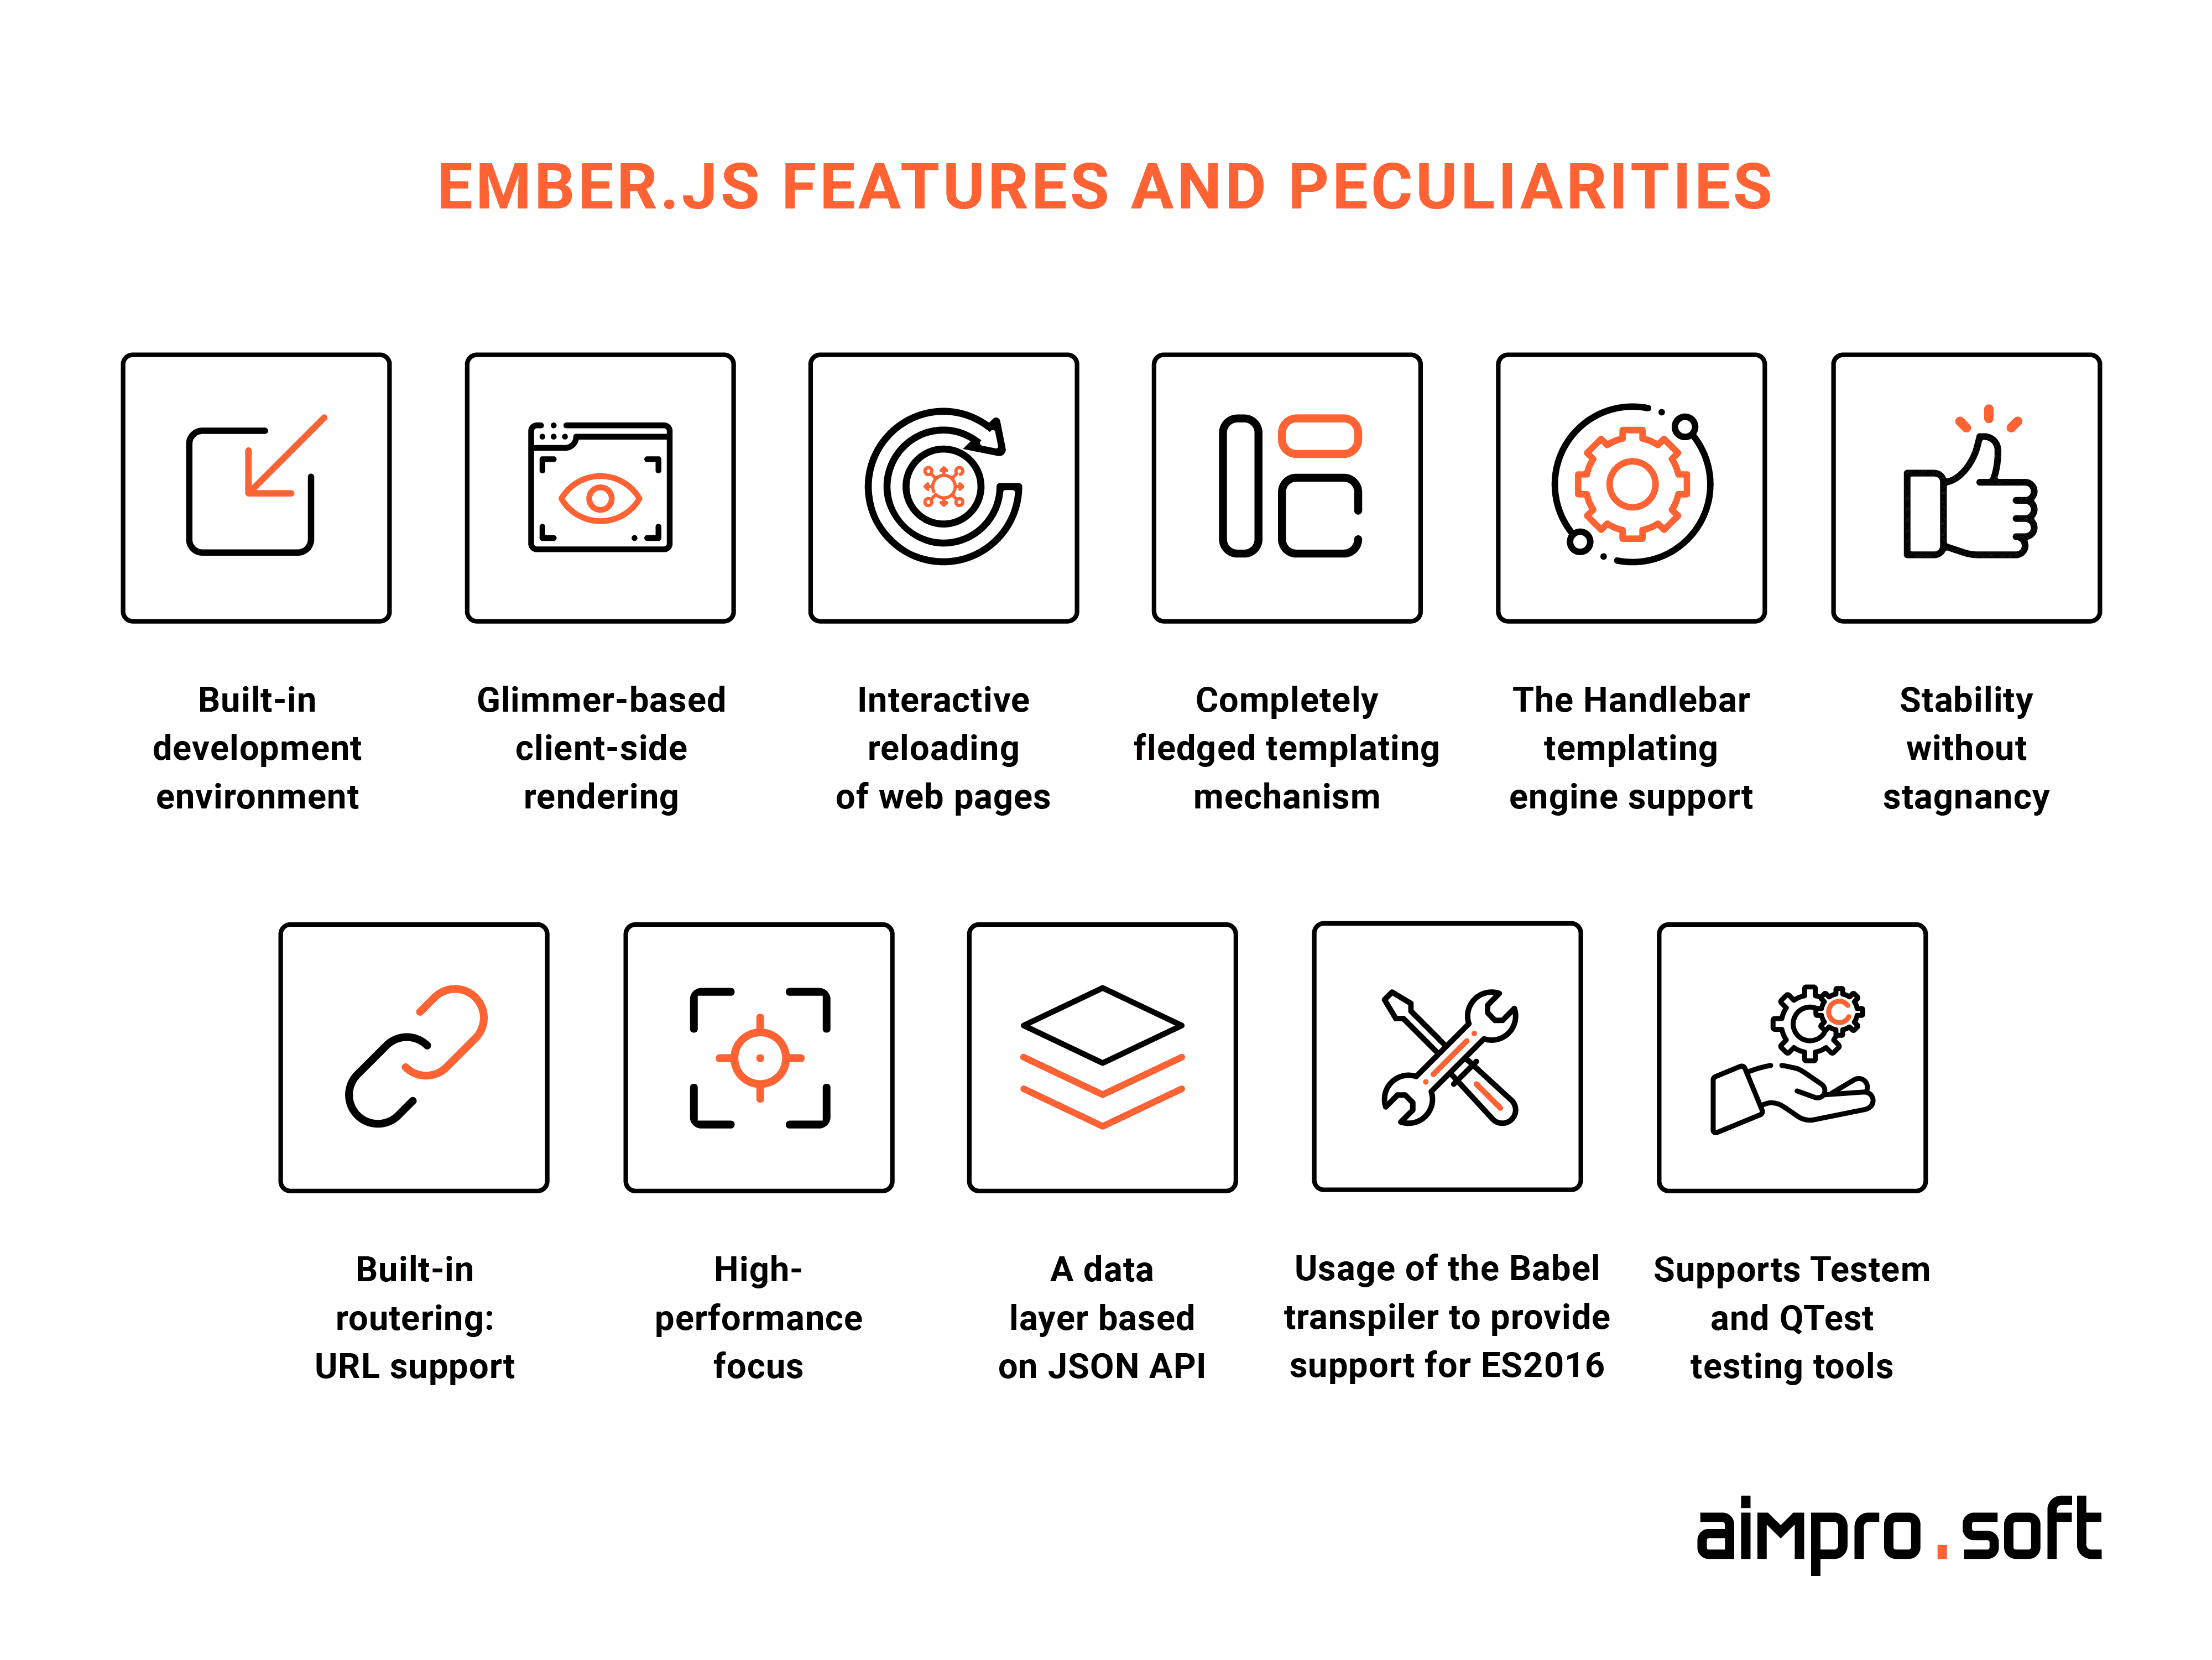 Ember.js features and peculiarities